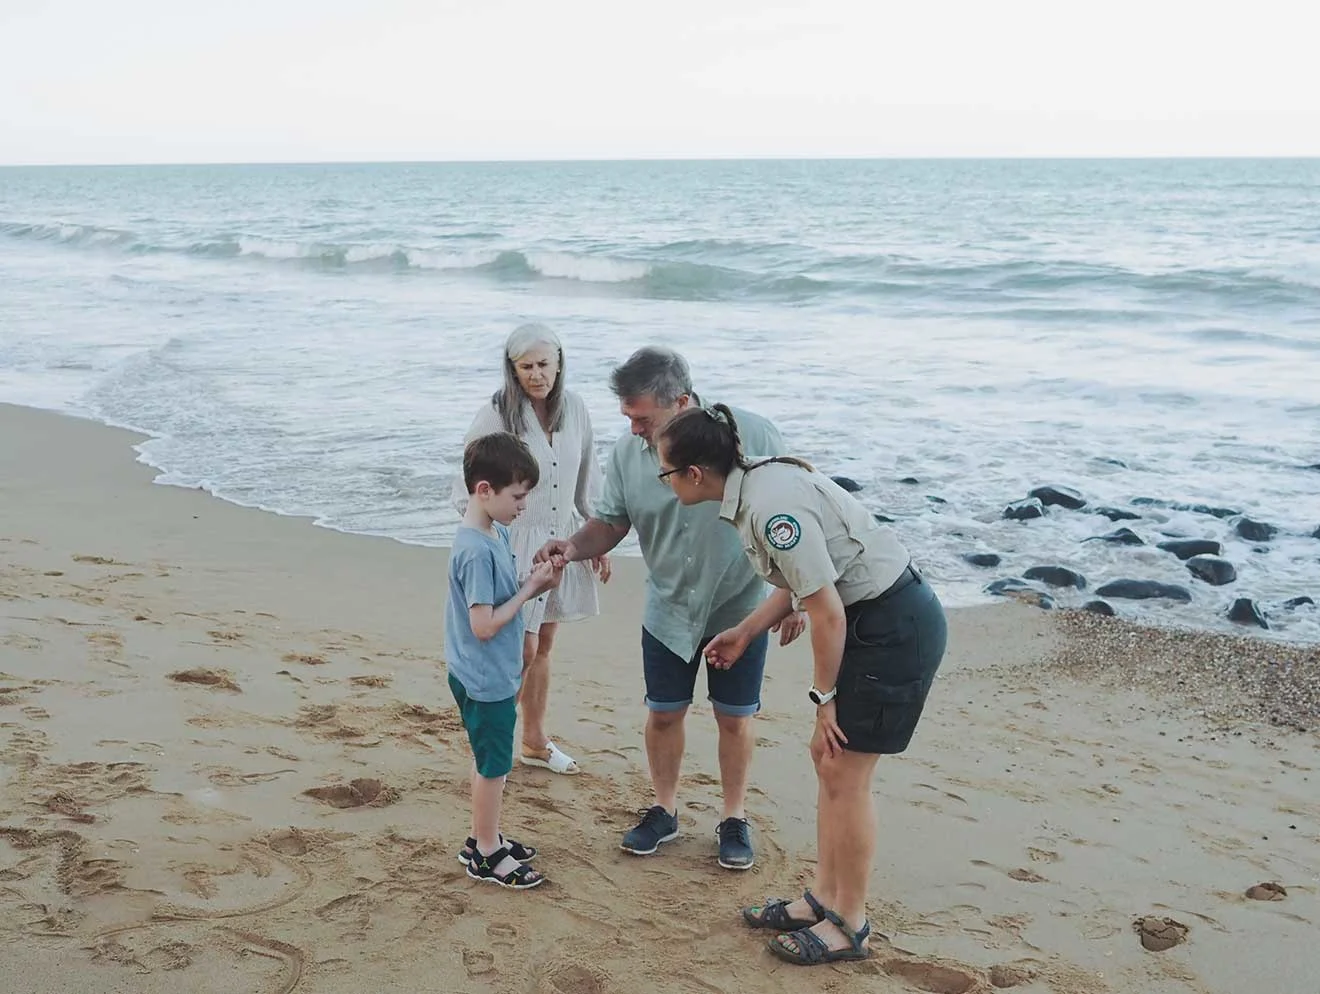 Three adults and a child inspecting something on the beach